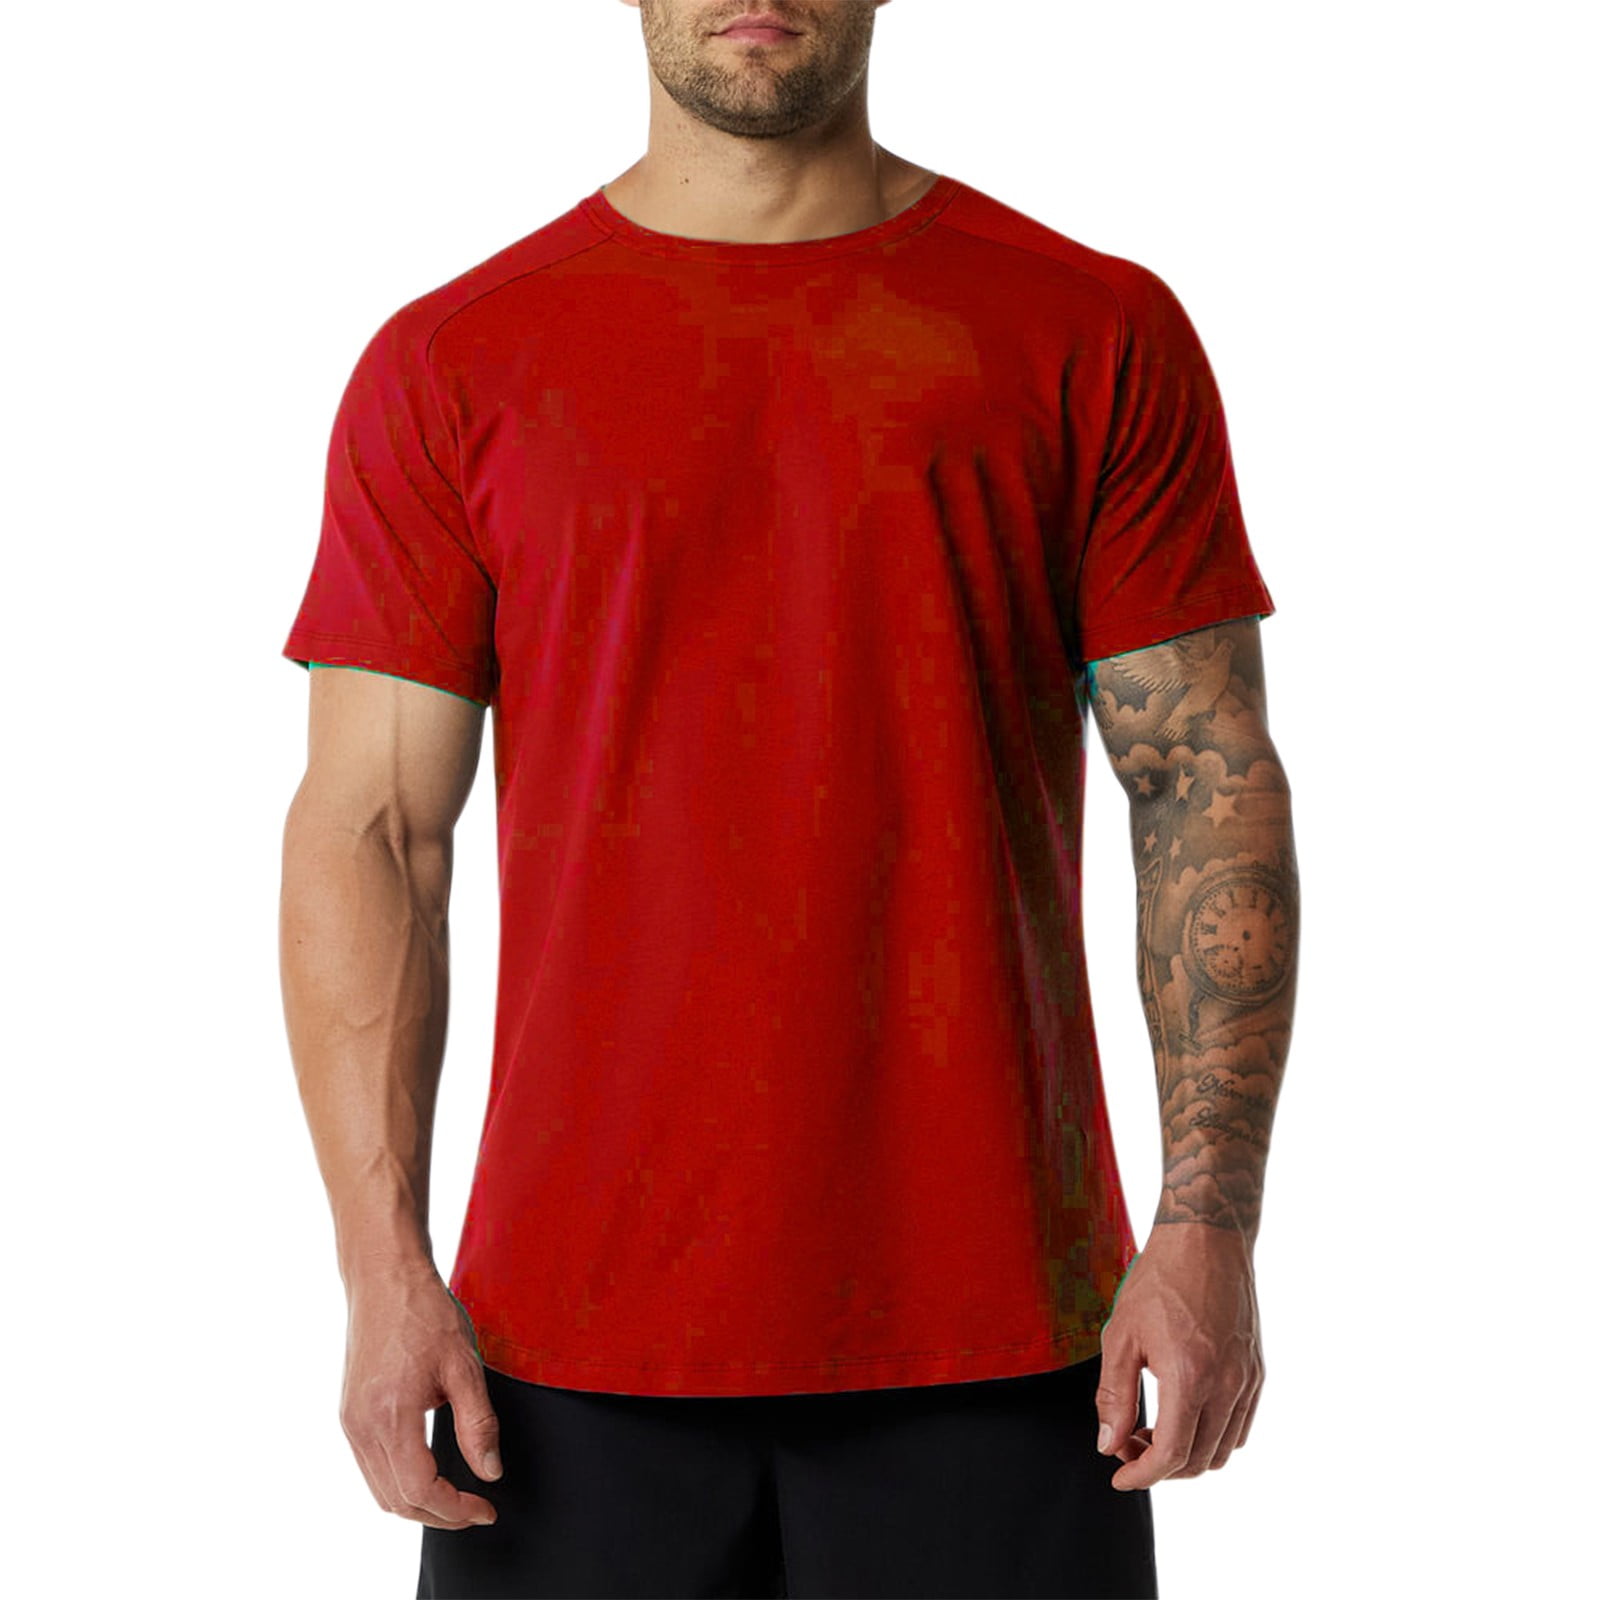 CAMERIARIO Men's Short Sleeve Solid Color Sport Fit T-Shirts, Sizes S ...